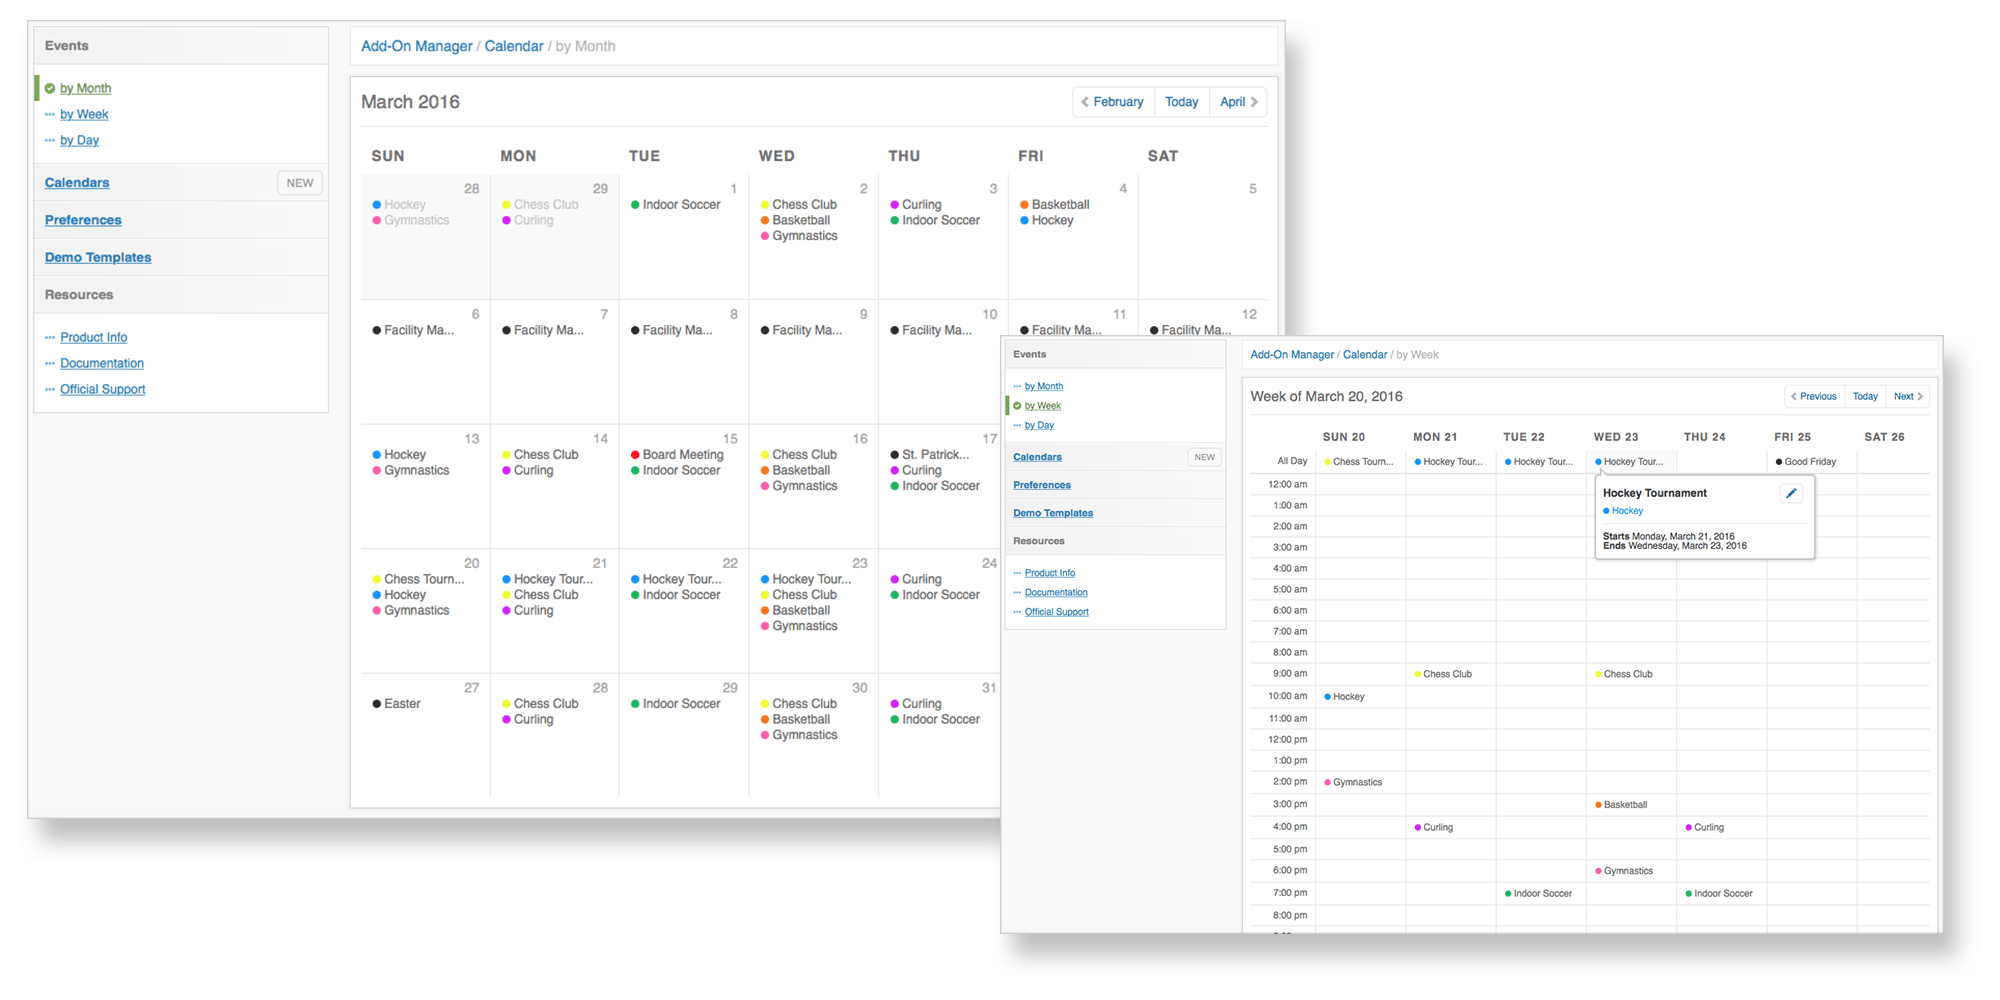 Calendar control panel includes visual Month, Week and Day views for easier management of events.